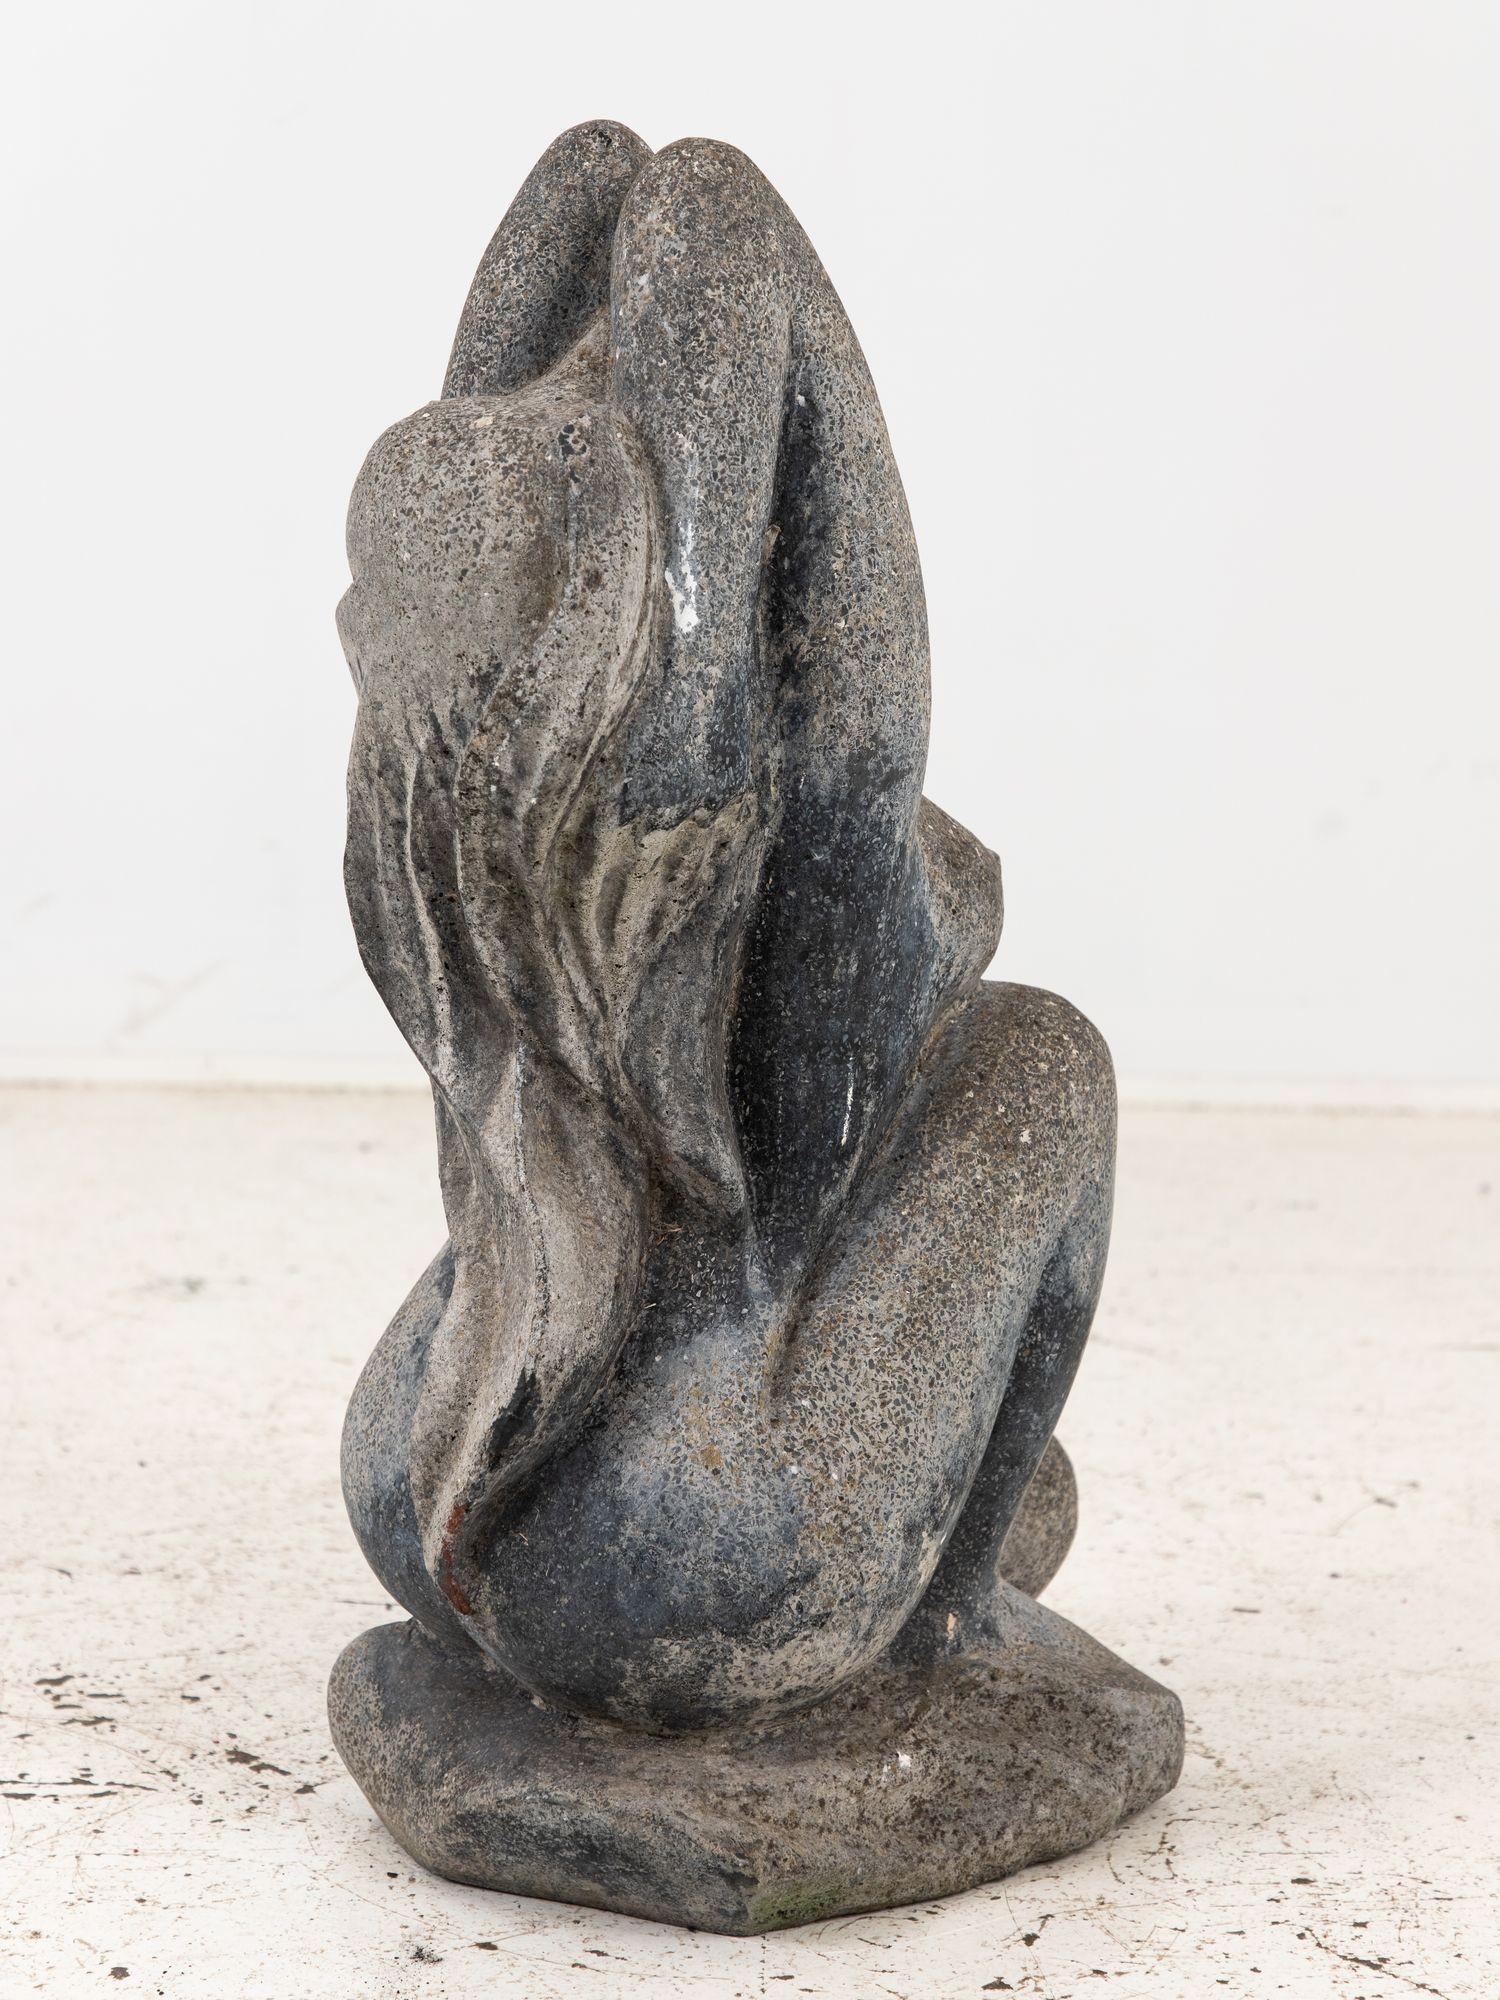 Carved from stone with masterful skill, this 20th-century sculpture portrays a woman in a moment of serene relaxation. With long flowing hair cascading down her back, she kneels gracefully, her posture exuding a sense of quiet strength and